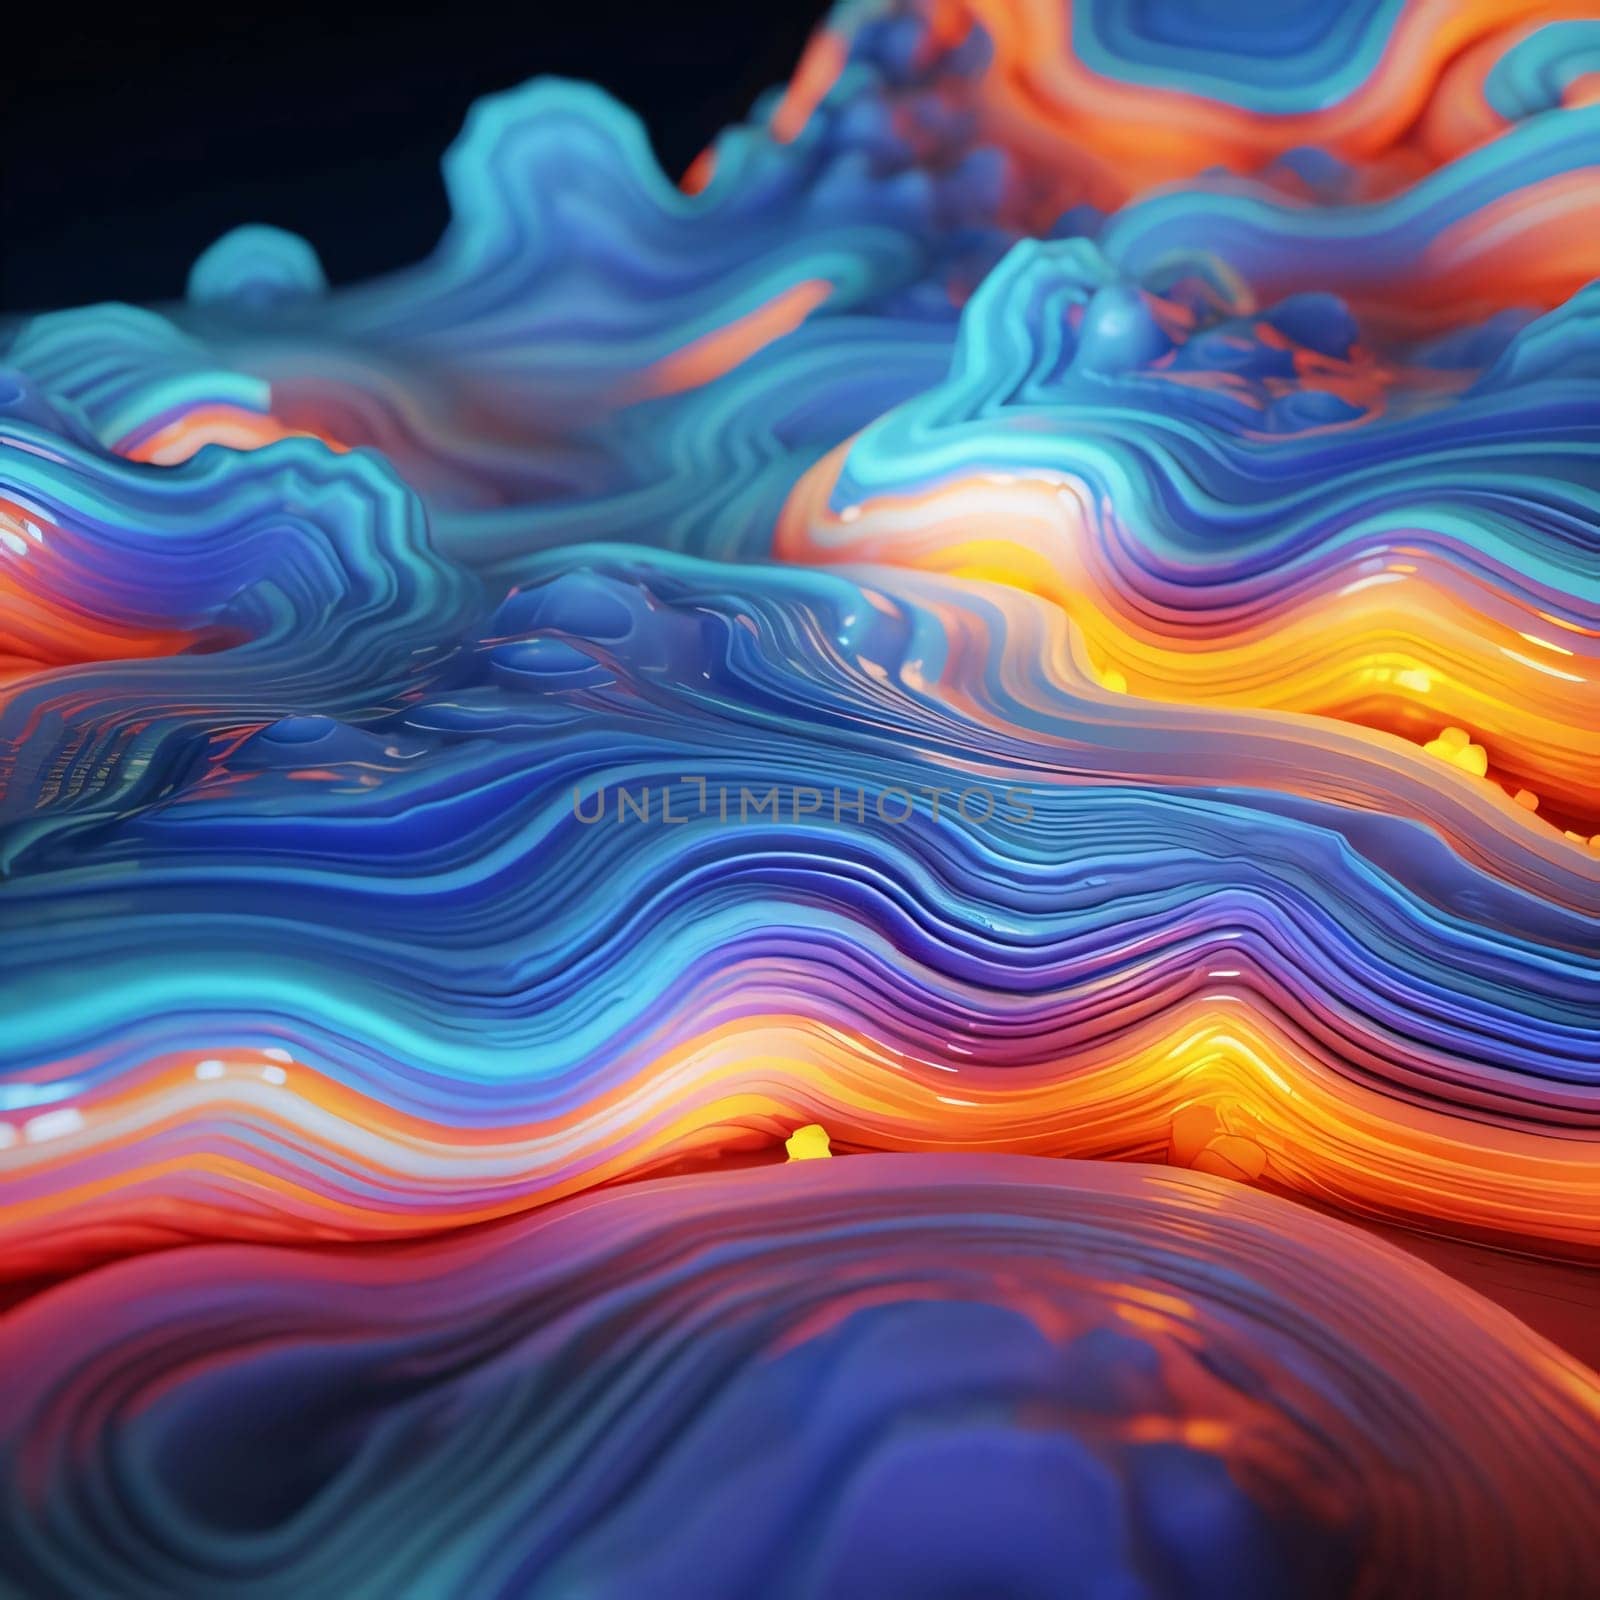 Abstract background design: 3d render, abstract background with colorful liquid waves, computer generated images